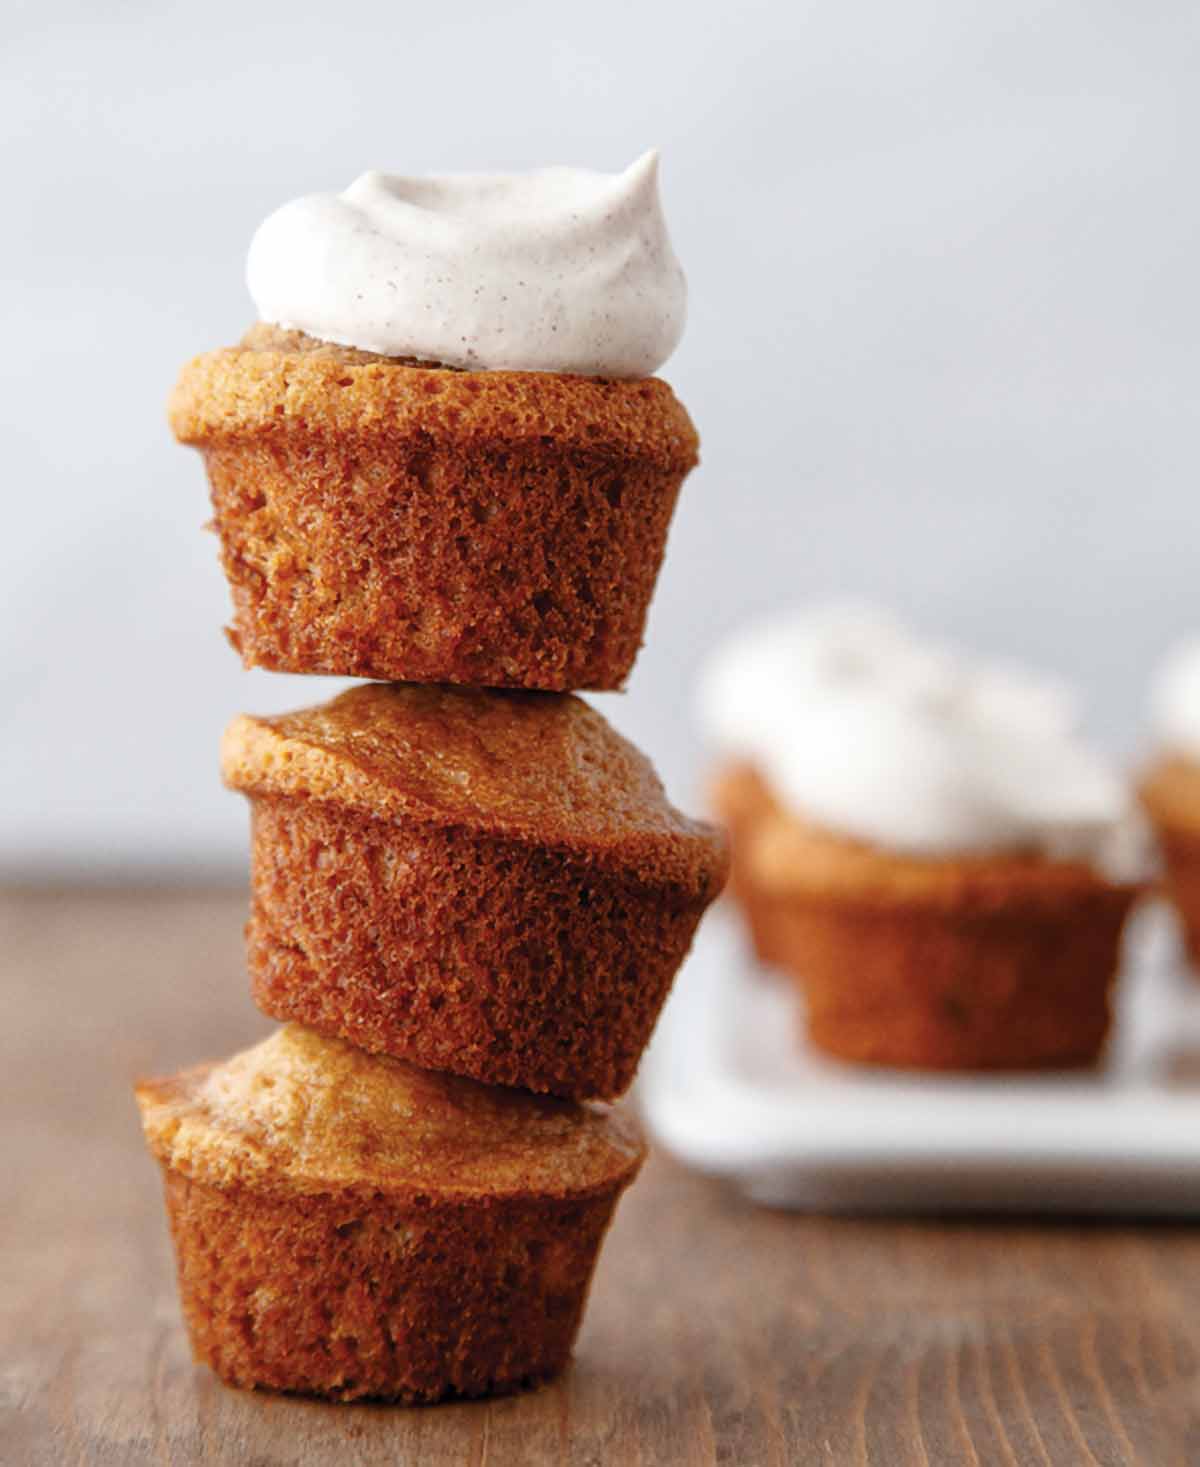 Three banana bread muffins stacked on top of each other with chai whipped cream on top and more muffins on a plate in the background.